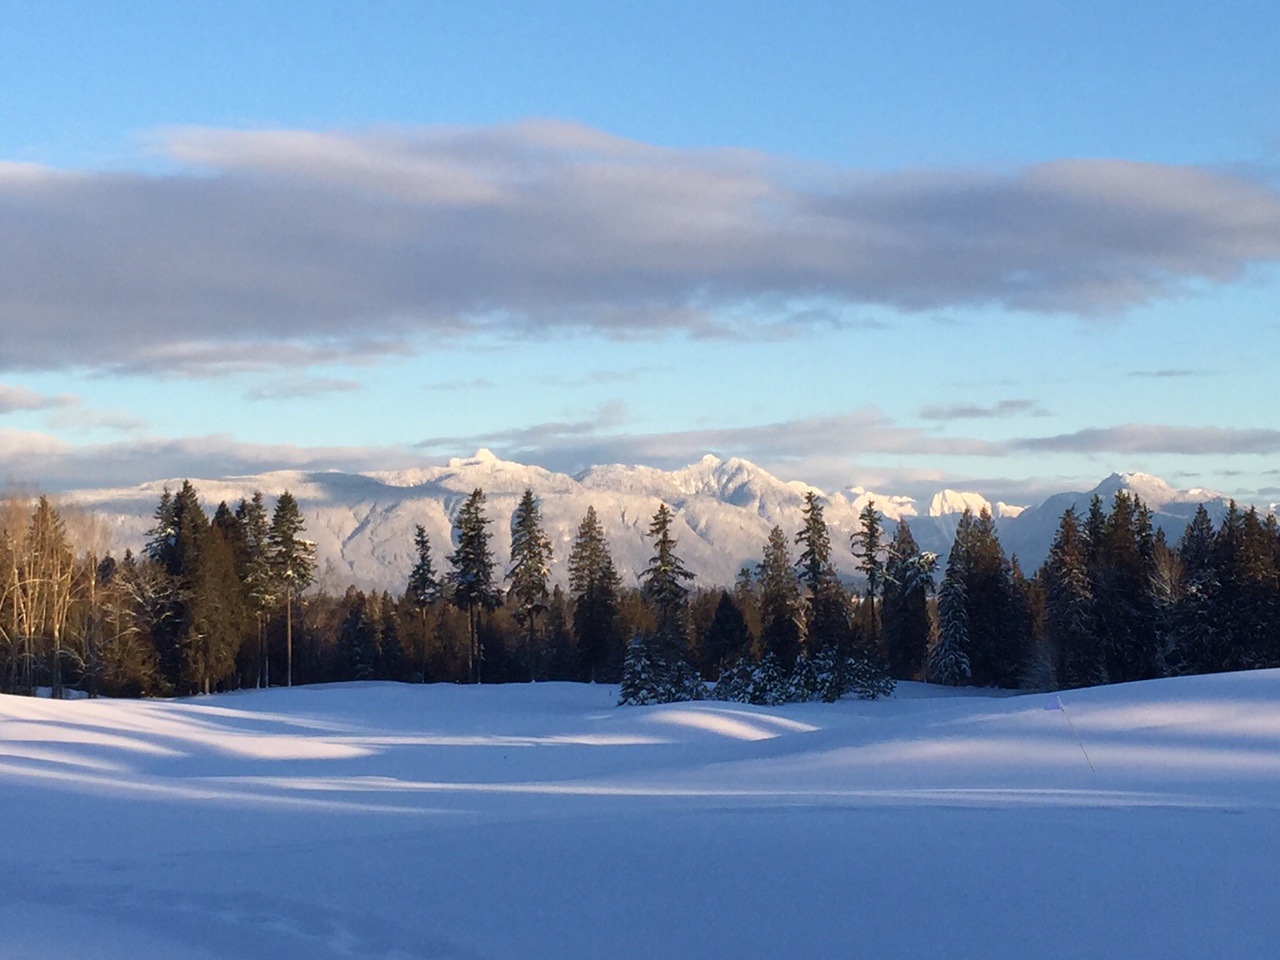 Snow covered golf course in Langley, BC